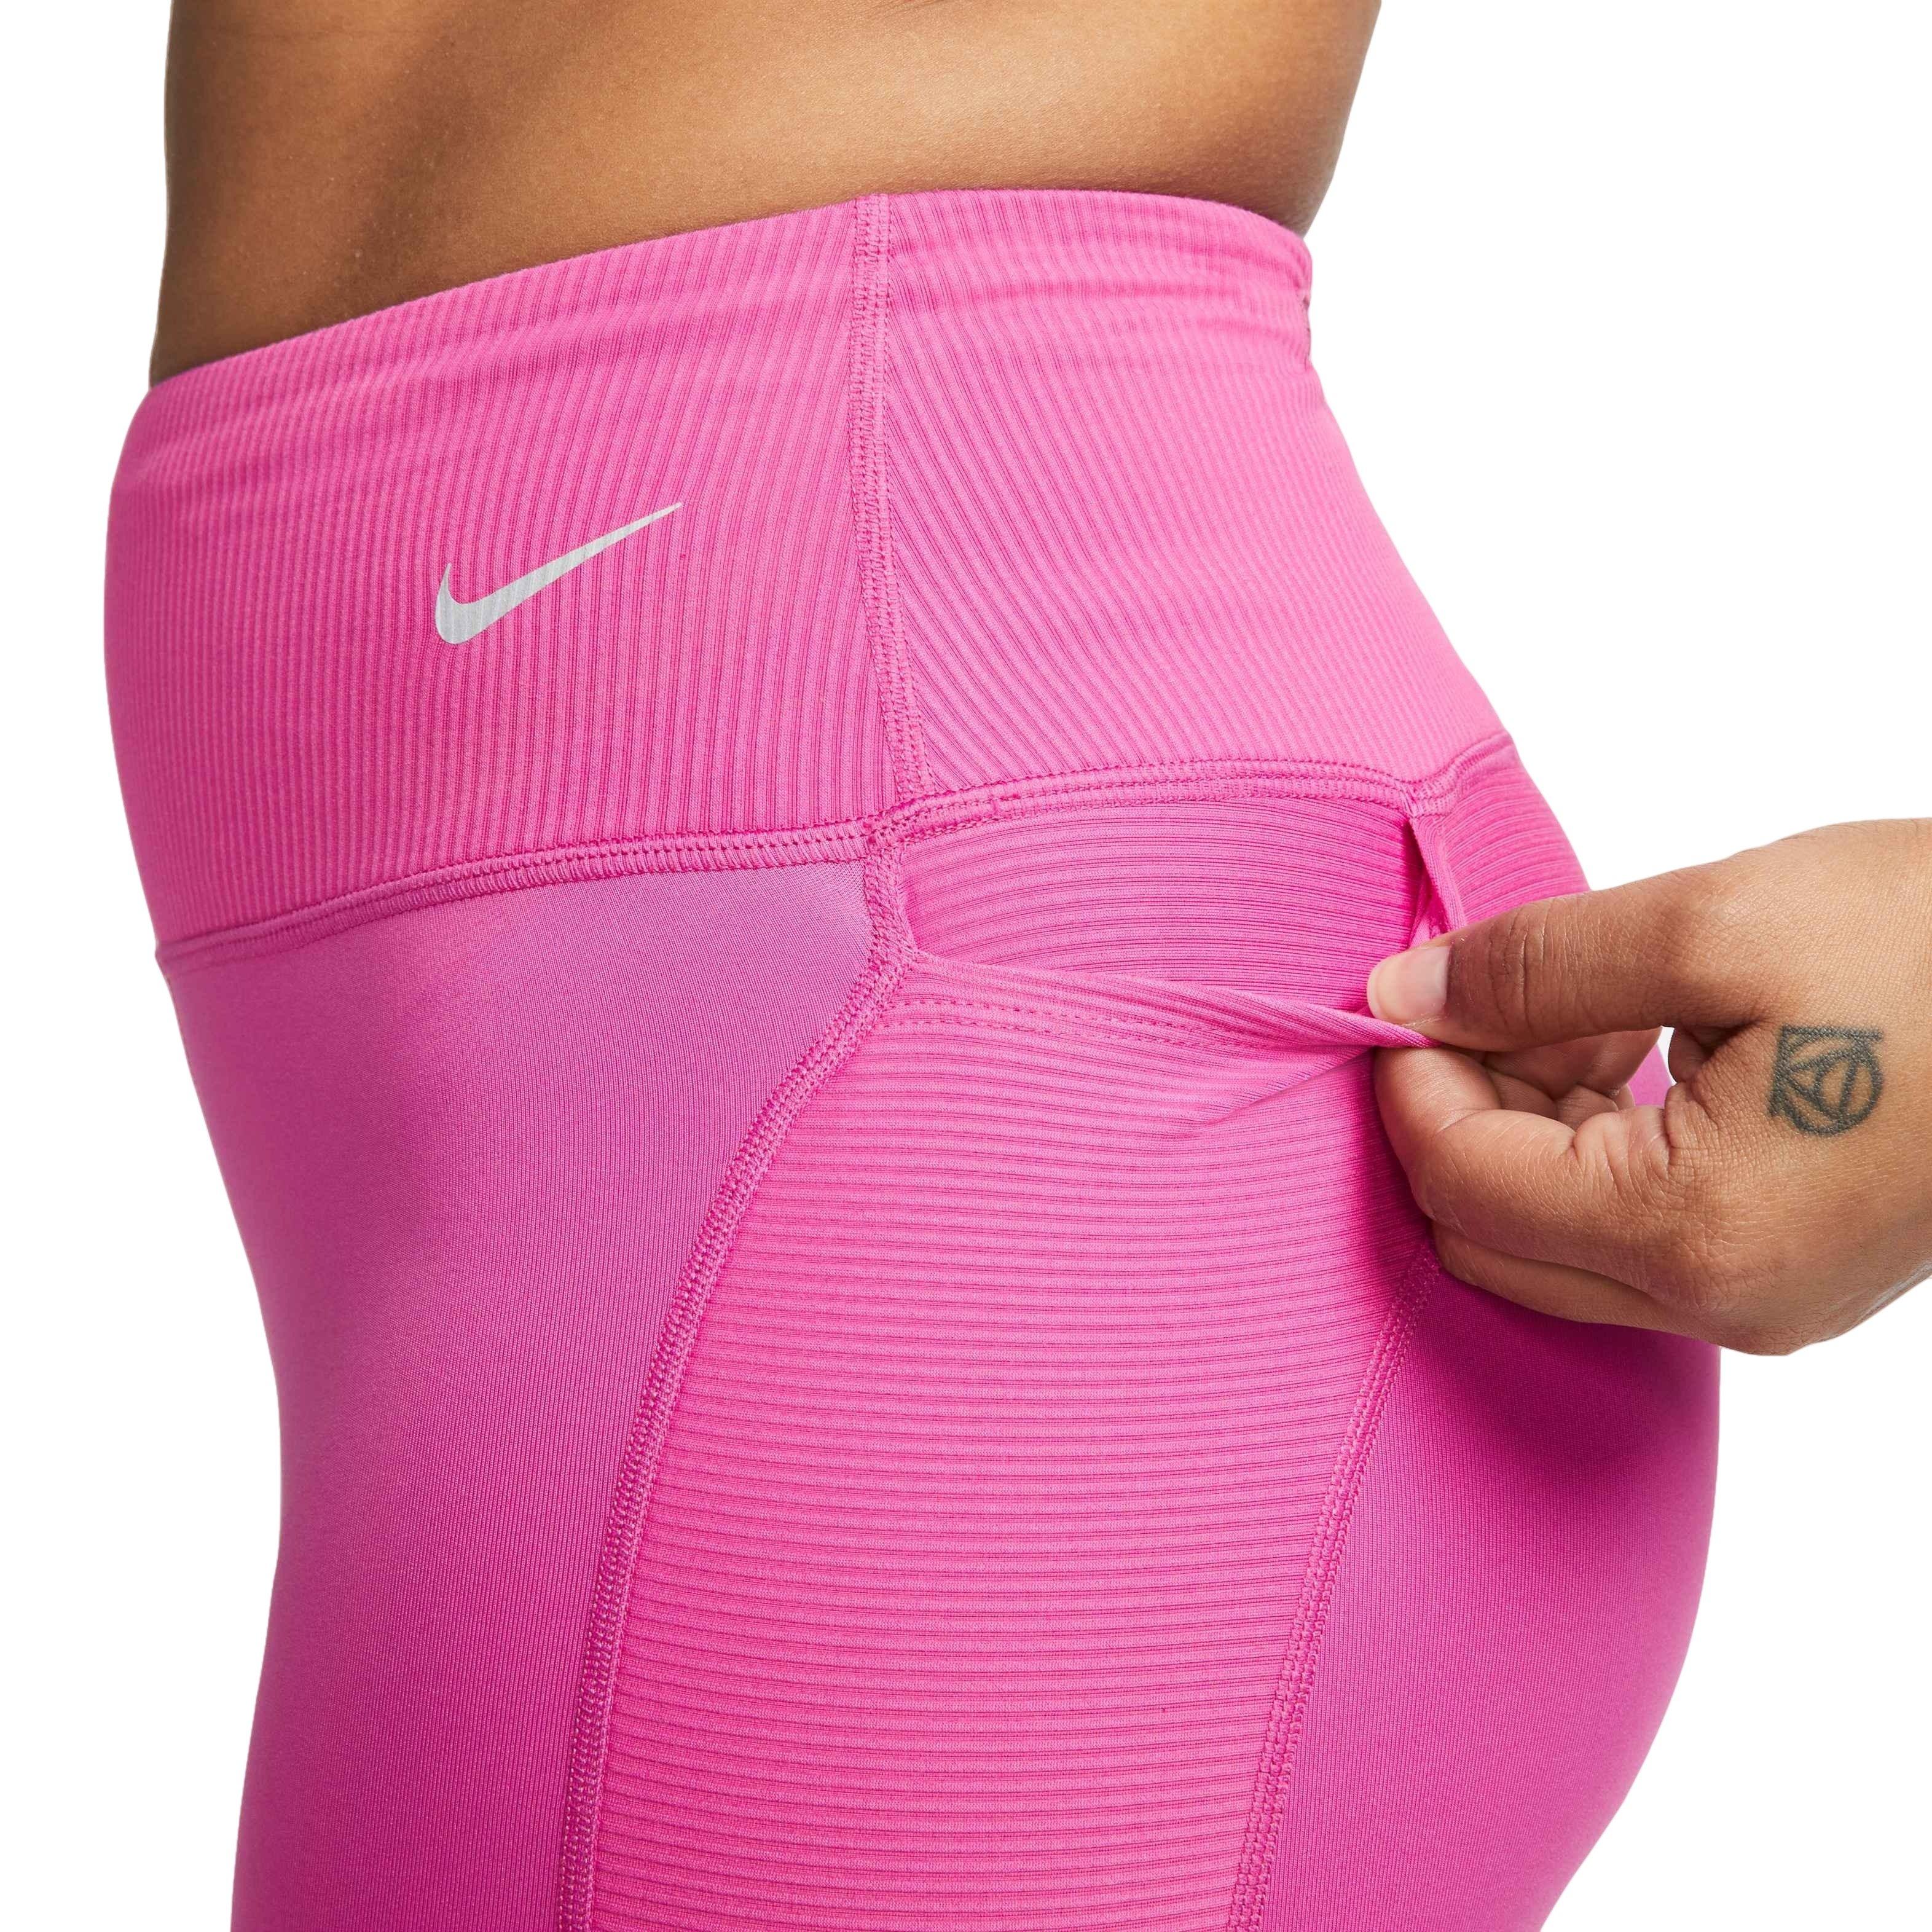 Nike Air Fast Women's Mid-Rise 7/8 Running Leggings with Pockets.